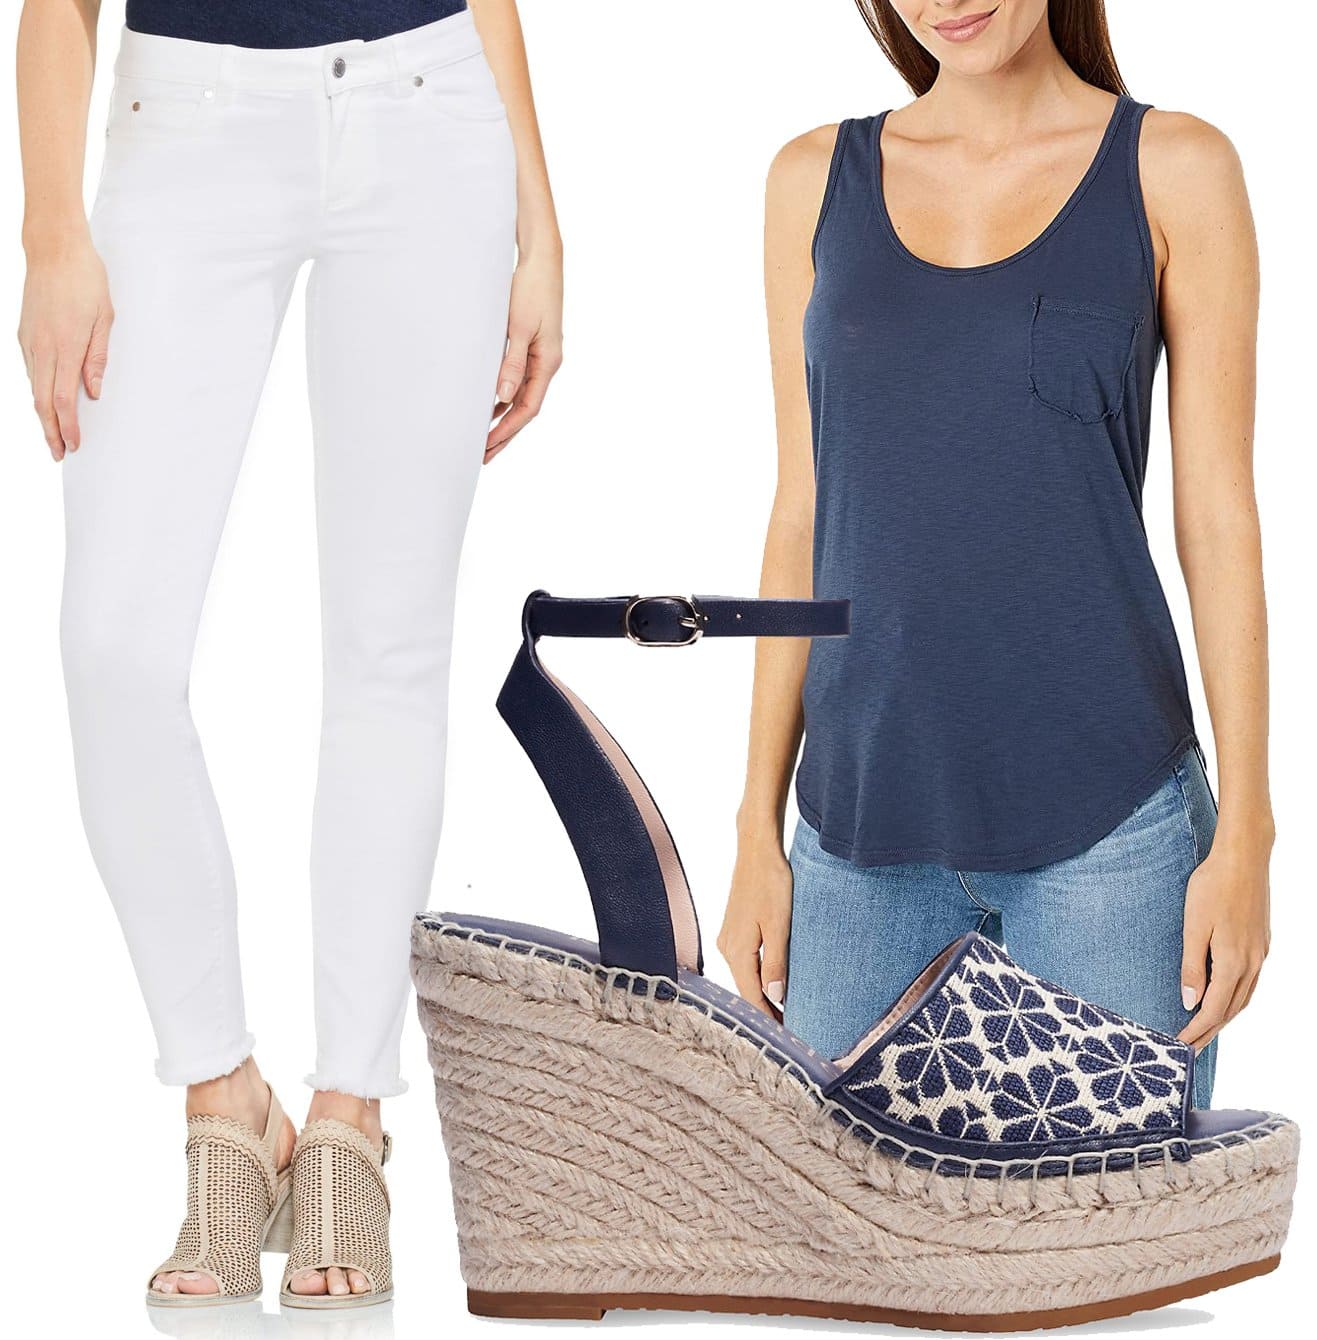 Vince Camuto Fray Hem Skinny Jeans, $79 at Nordstrom, Kate Spade New York Fab Jacquard Spade Flower Wedge Espadrille, $198 at Saks Fifth Avenue, LAmade Boyfriend Tank Top, $48 at Zappos